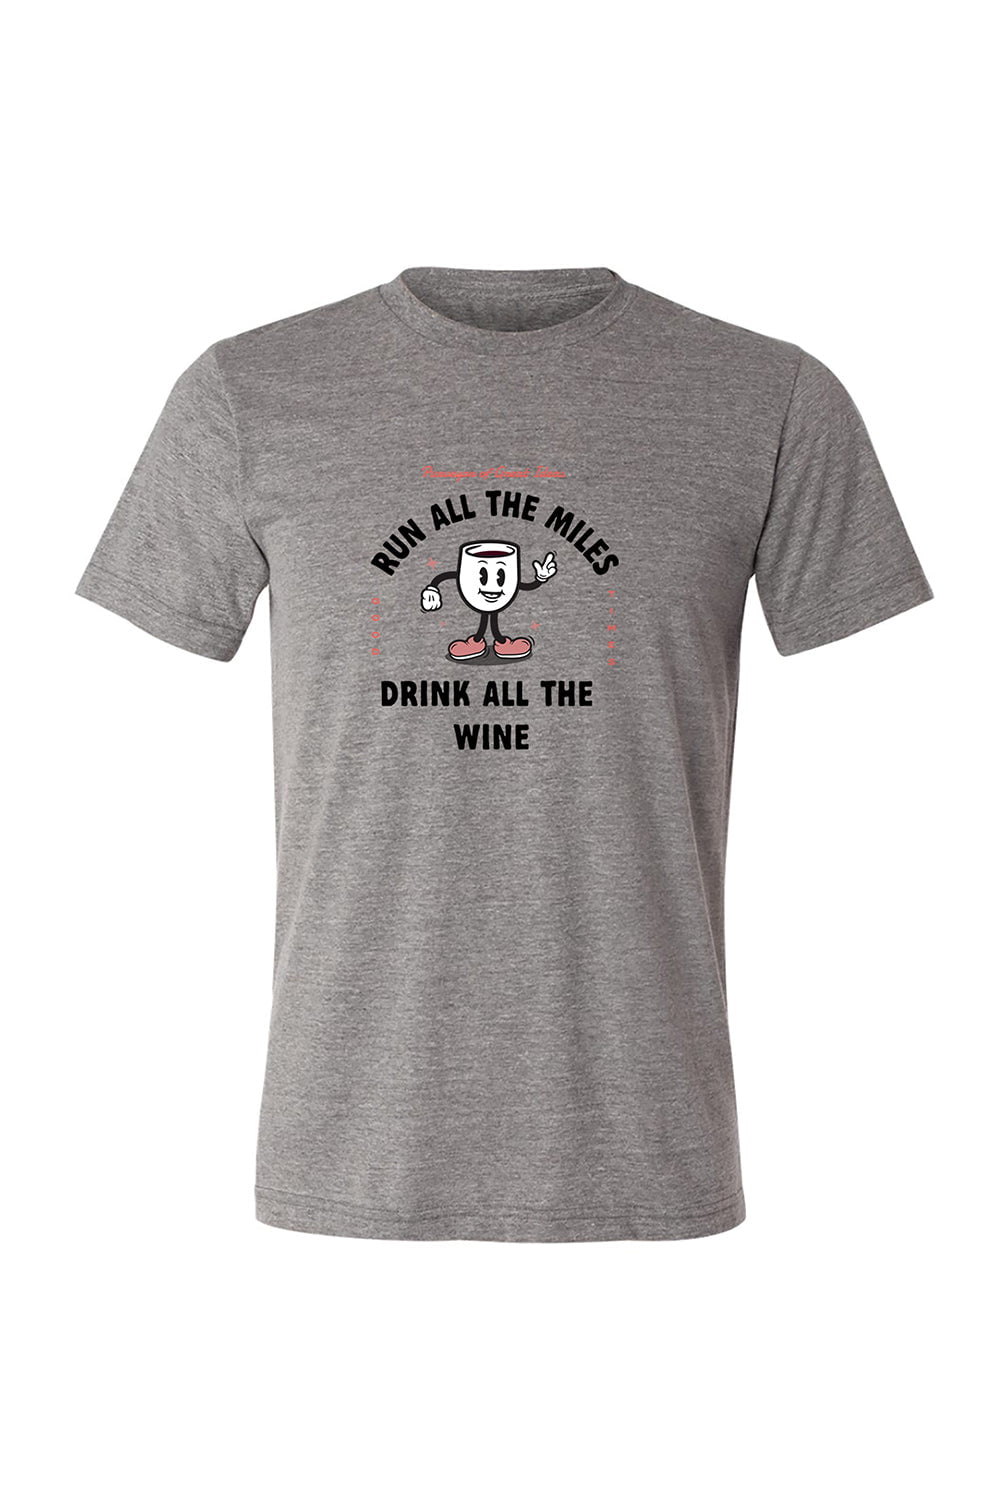 Sarah Marie Design Studio Run All The Miles, Drink All The Wine T-Shirt